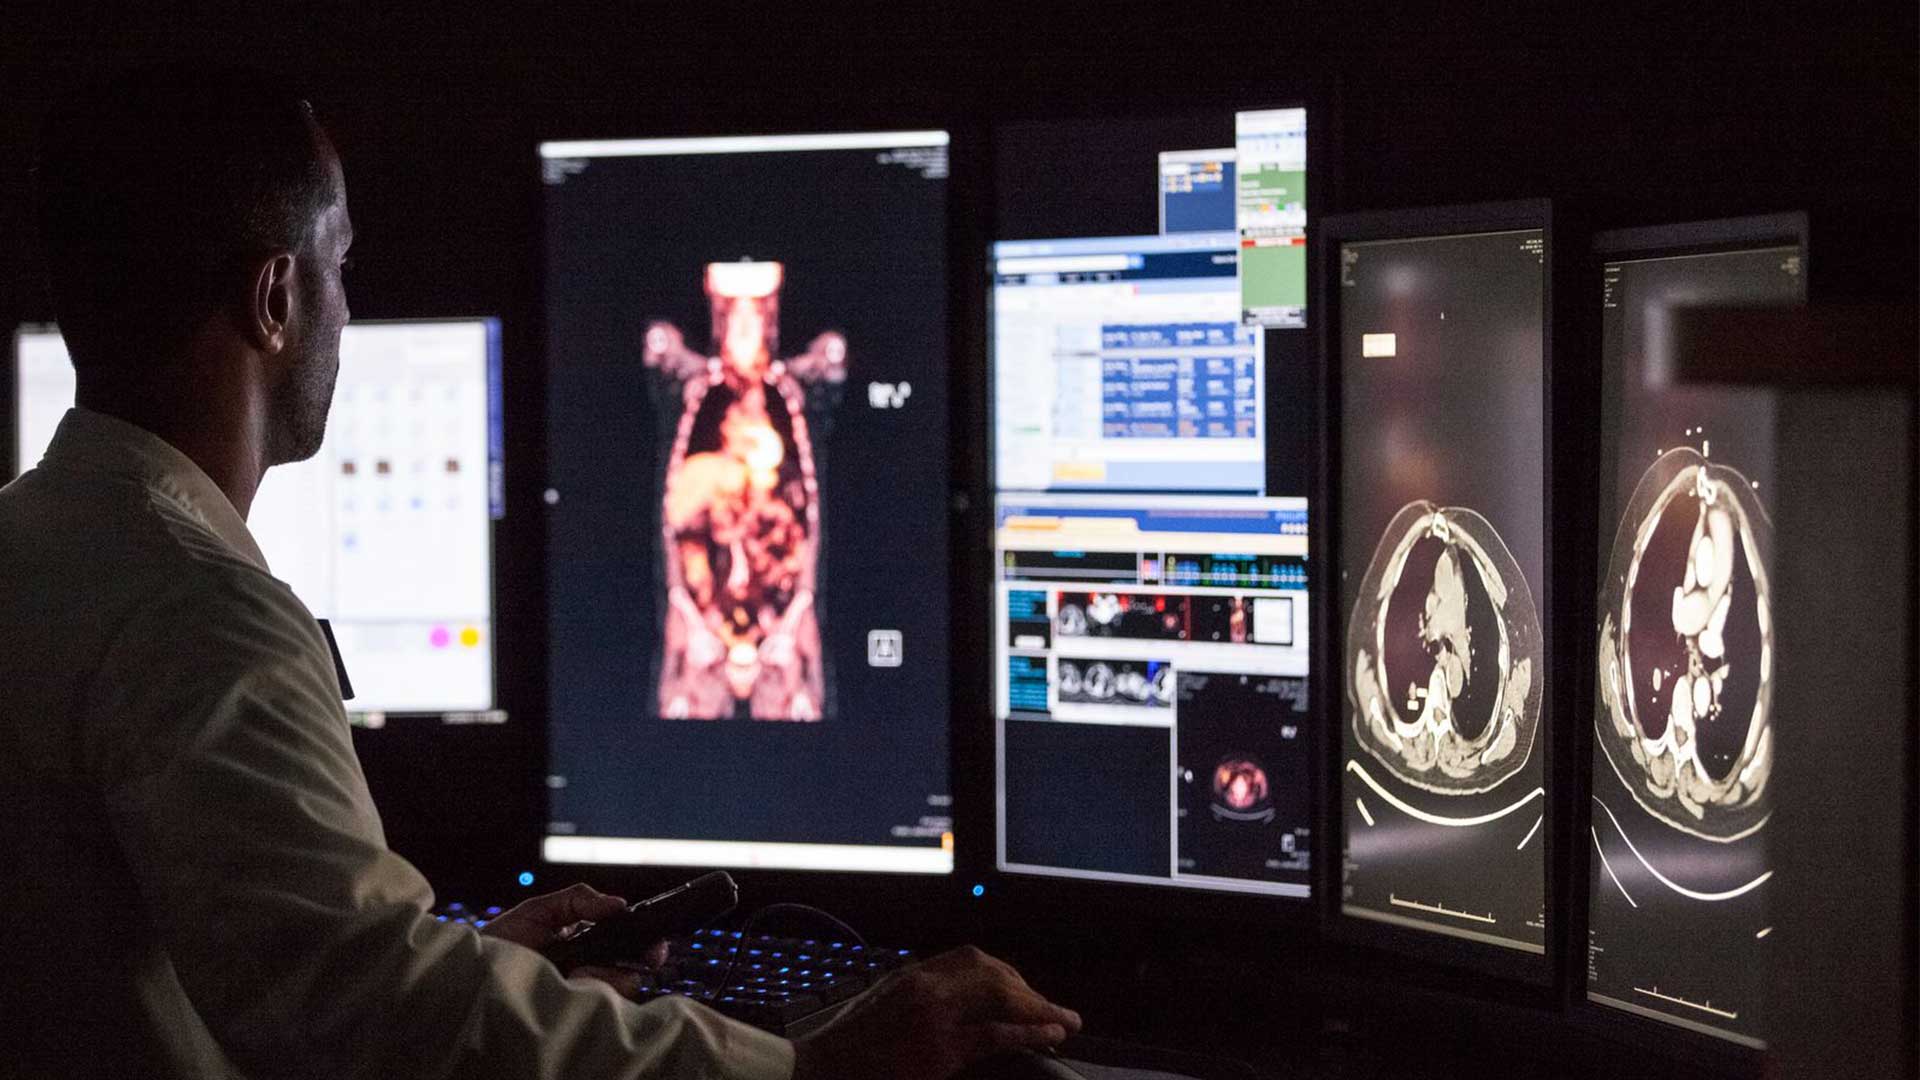 CT scan images which can be used to help detect cancer